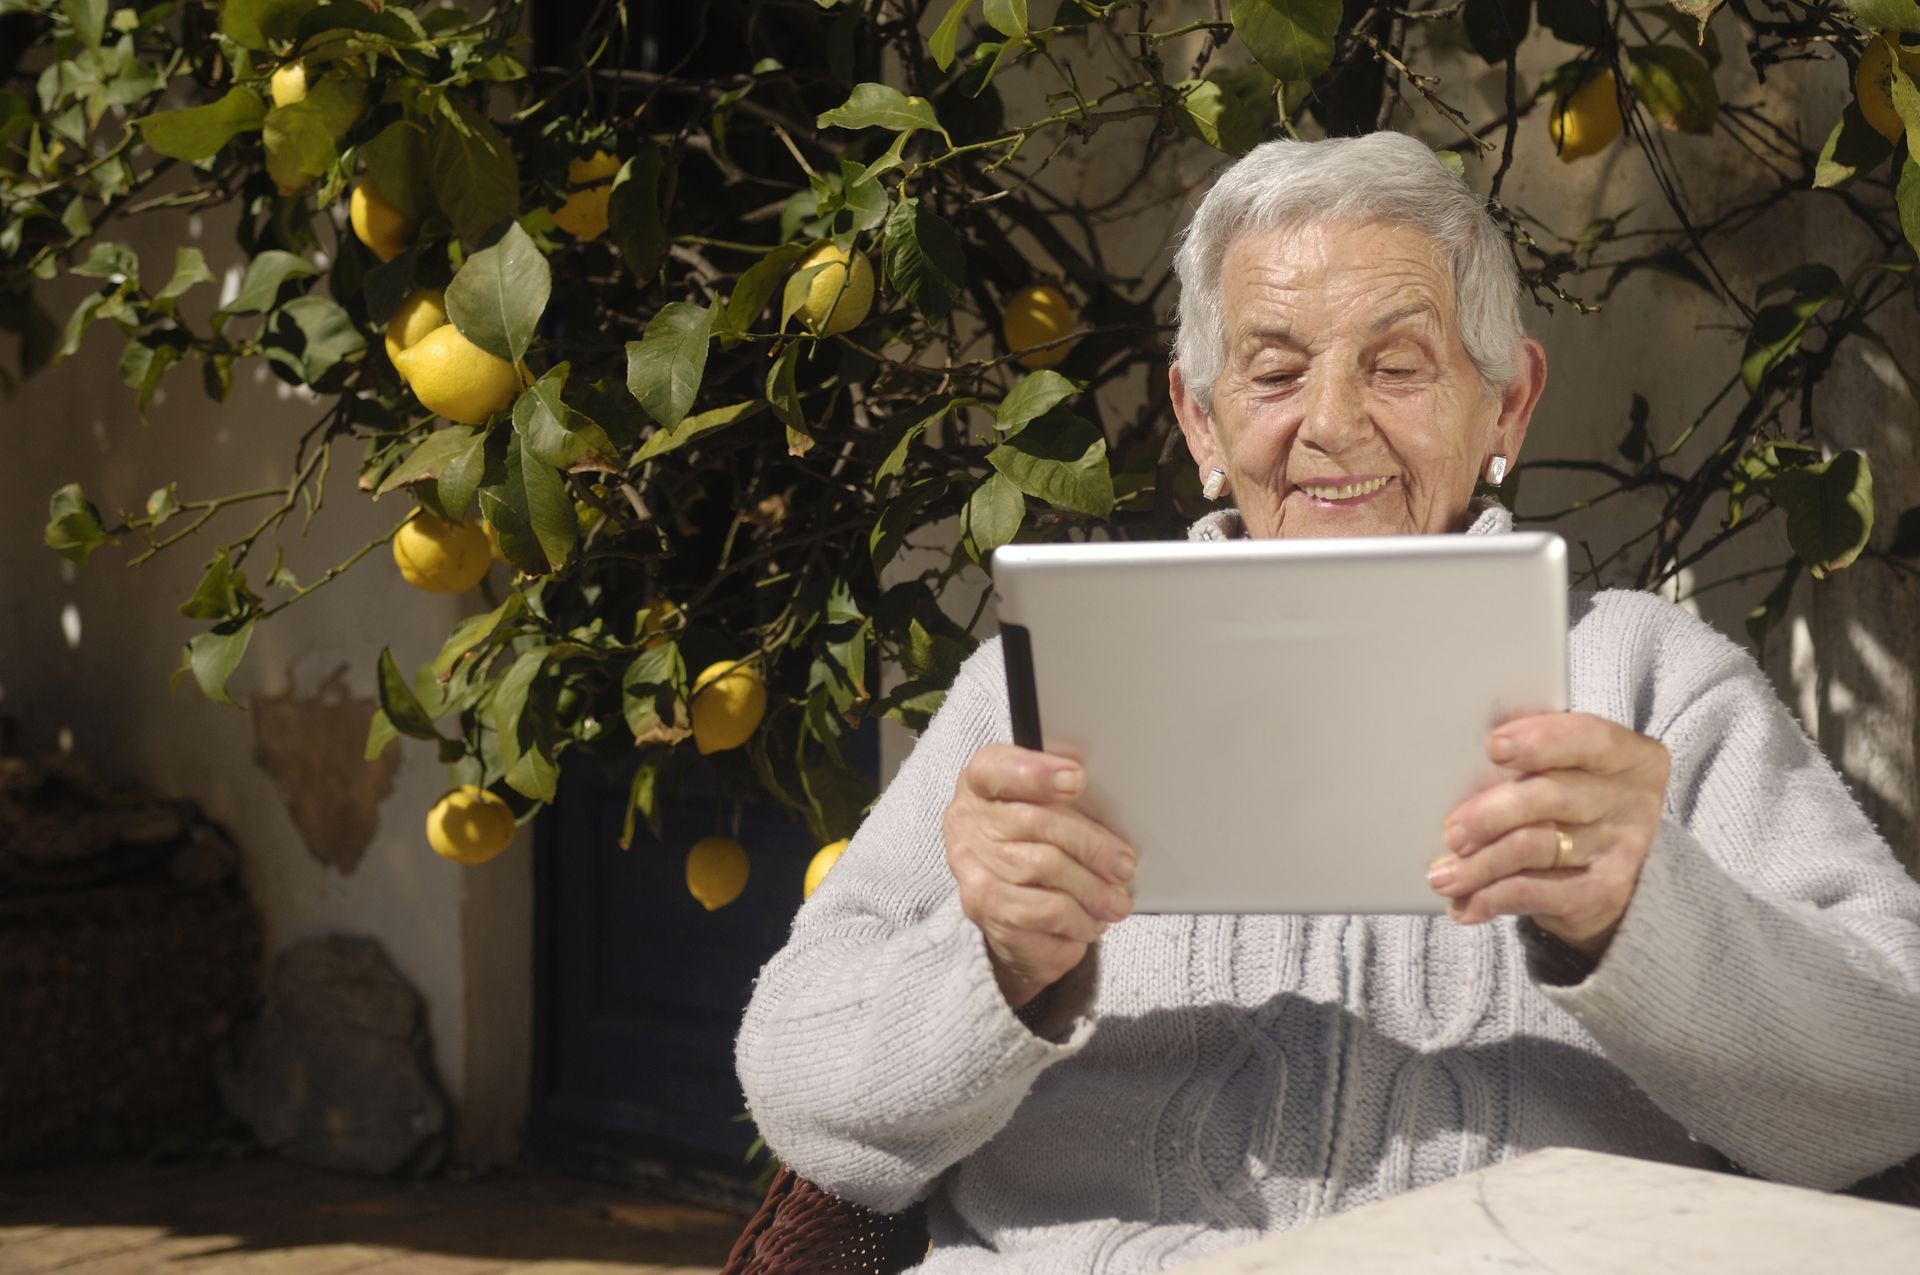  Smiling older woman sitting next to a lemon tree and reading on a tablet. She has on a tan sweater. NANA’S BOOKS help her to read independently, as they are considerately-formatted, large print books which support reminiscence. 